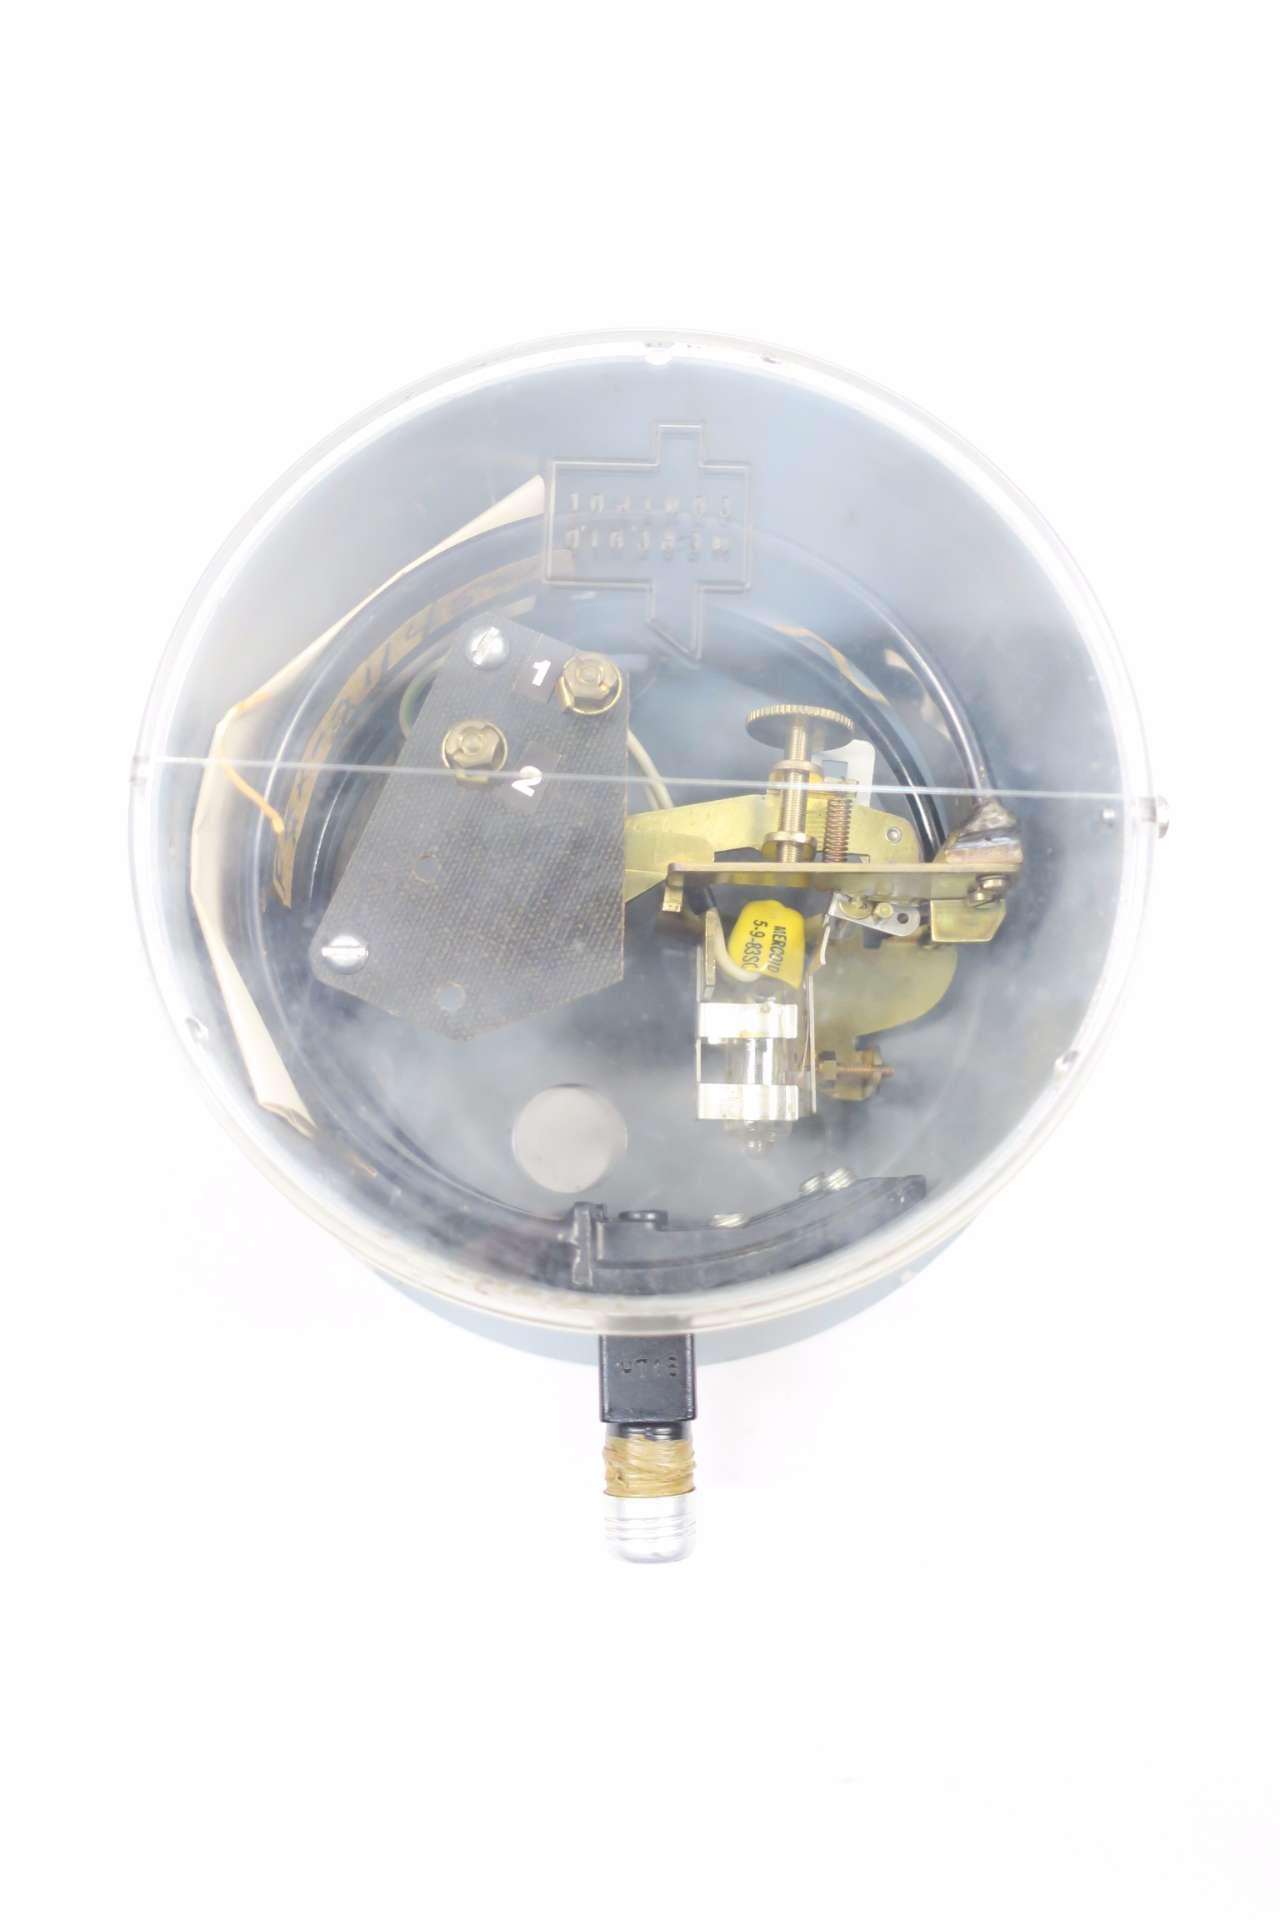 Details about   Mercoid Controls Differential Pressure Switch BB-223-2-11S 